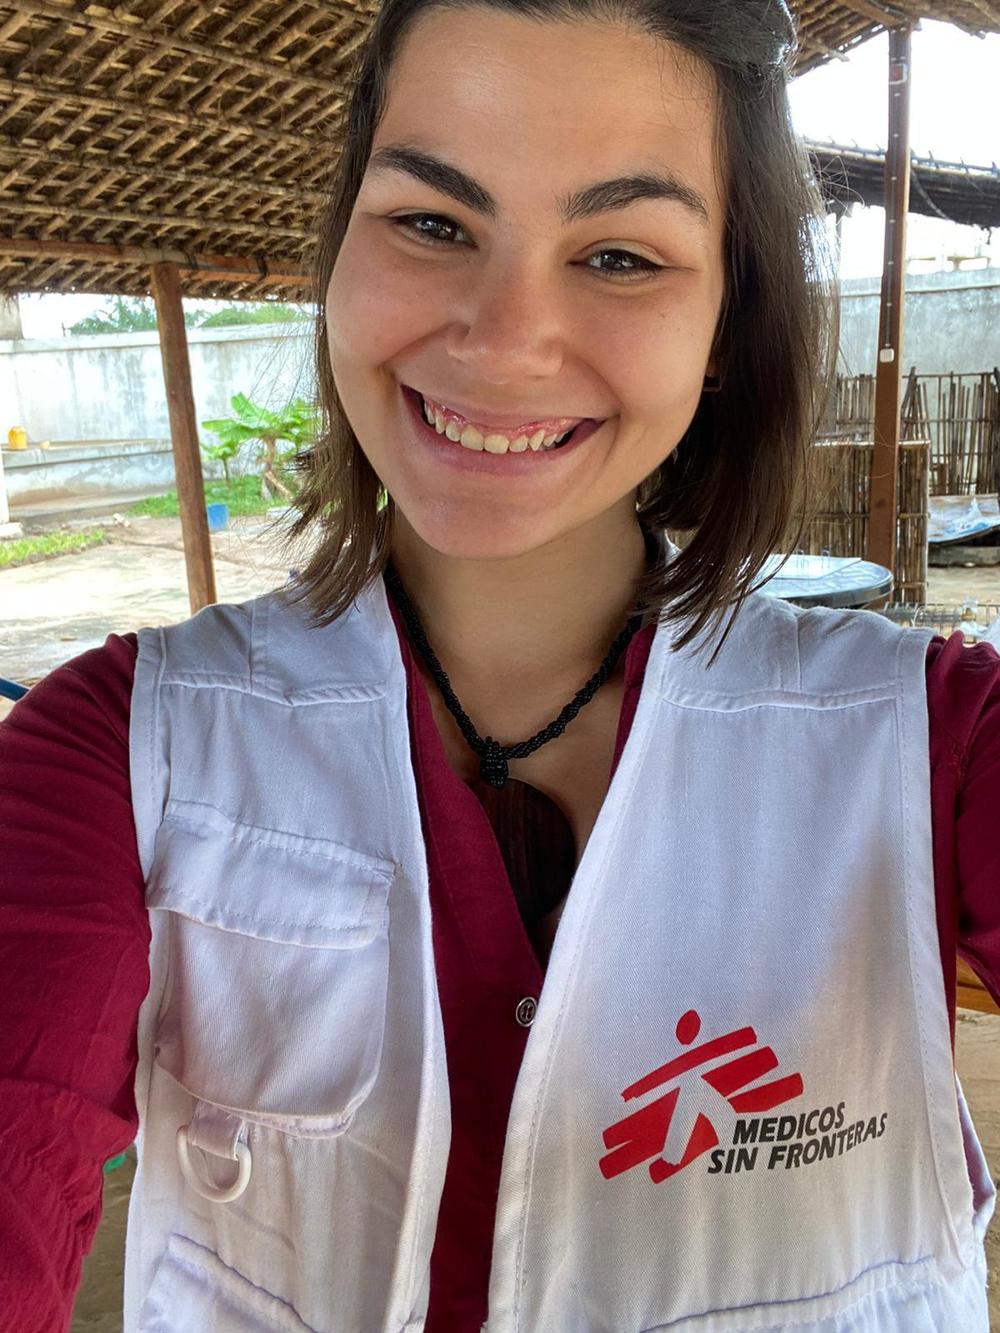 Amparo Vilasmil is an MSF mental health activity manager in Cabo Delgado, Mozambique. She says the goal of mental health first aid is to 